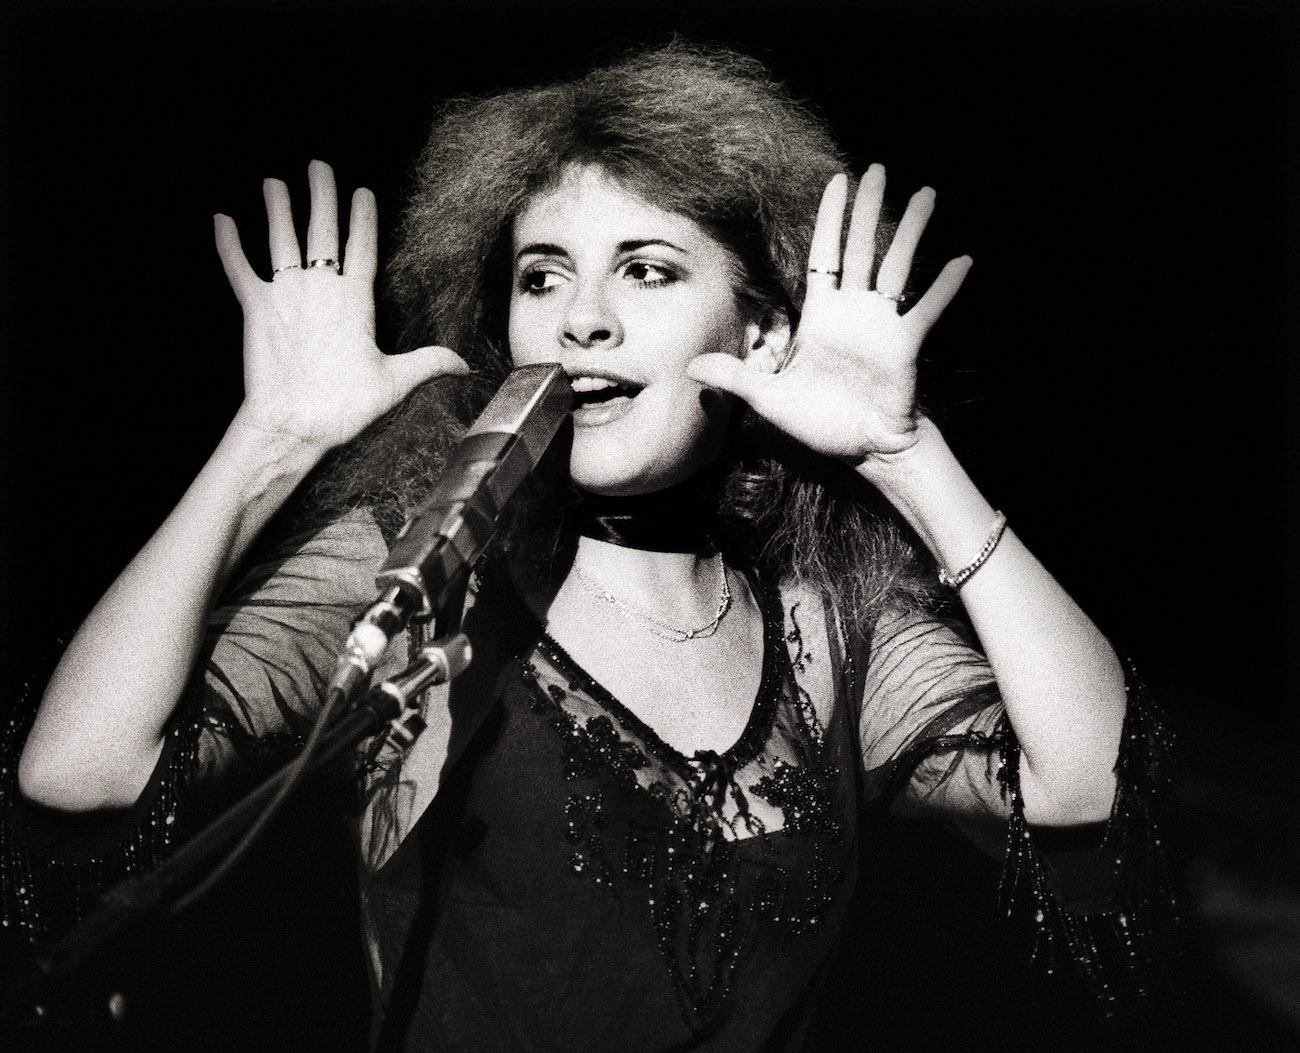 Stevie Nicks performing with Fleetwood Mac in the Netherlands, 1980.